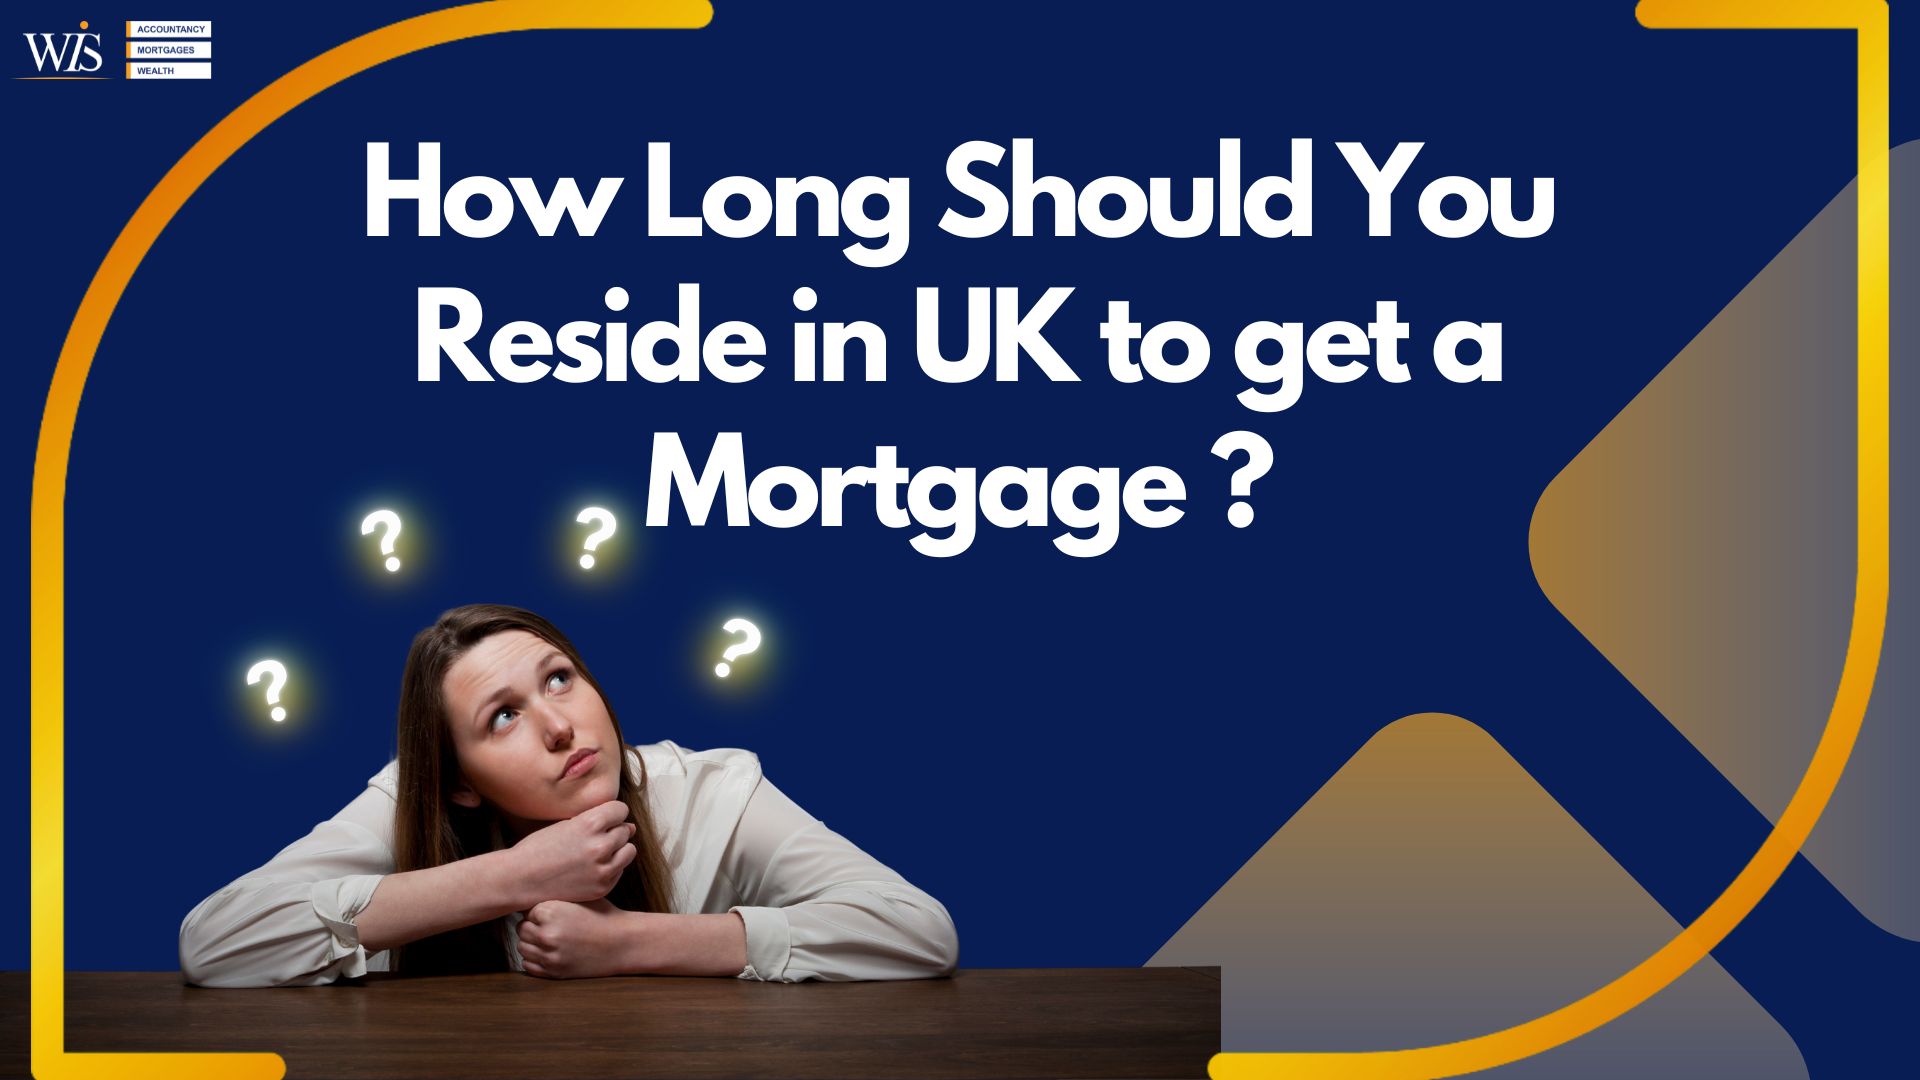 How Long Should I Be in the UK to Get a Mortgage? image